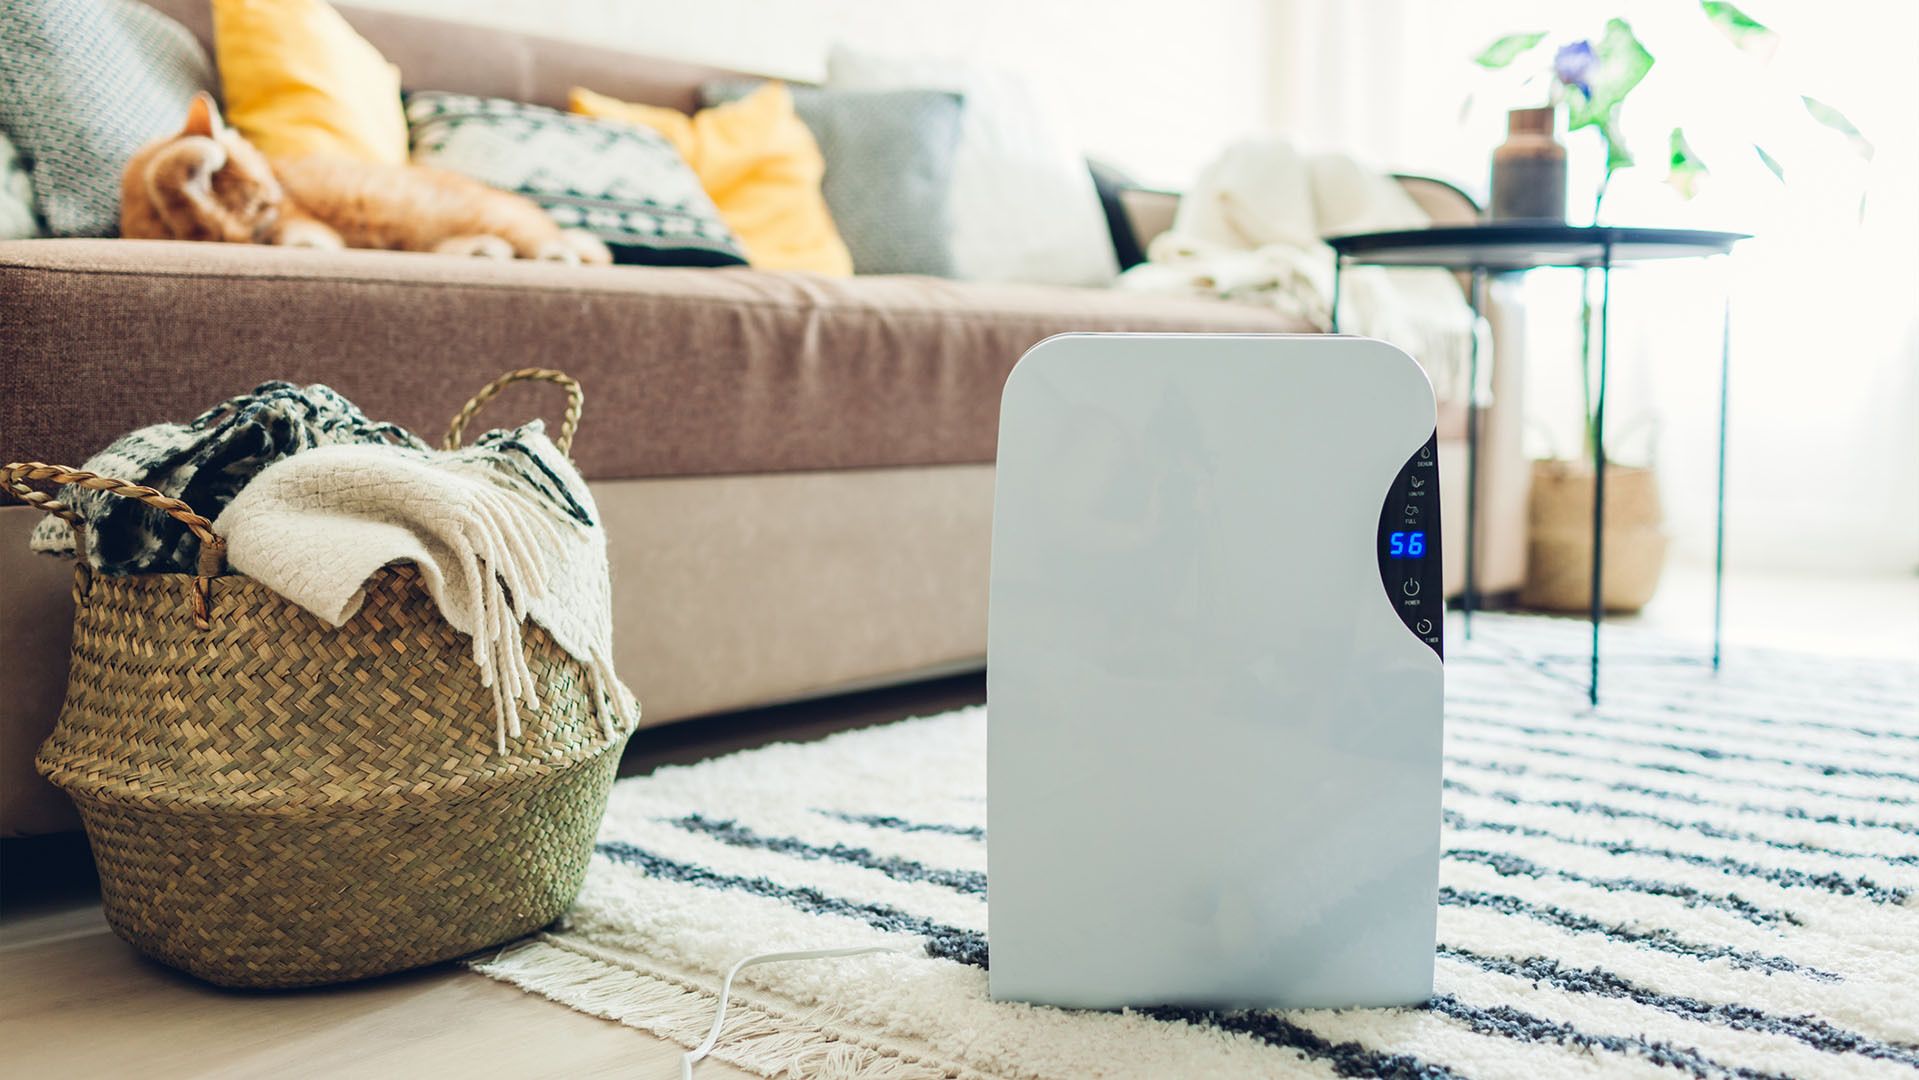 The 7 Best Dehumidifiers for Basements of 2024, Tested and Reviewed